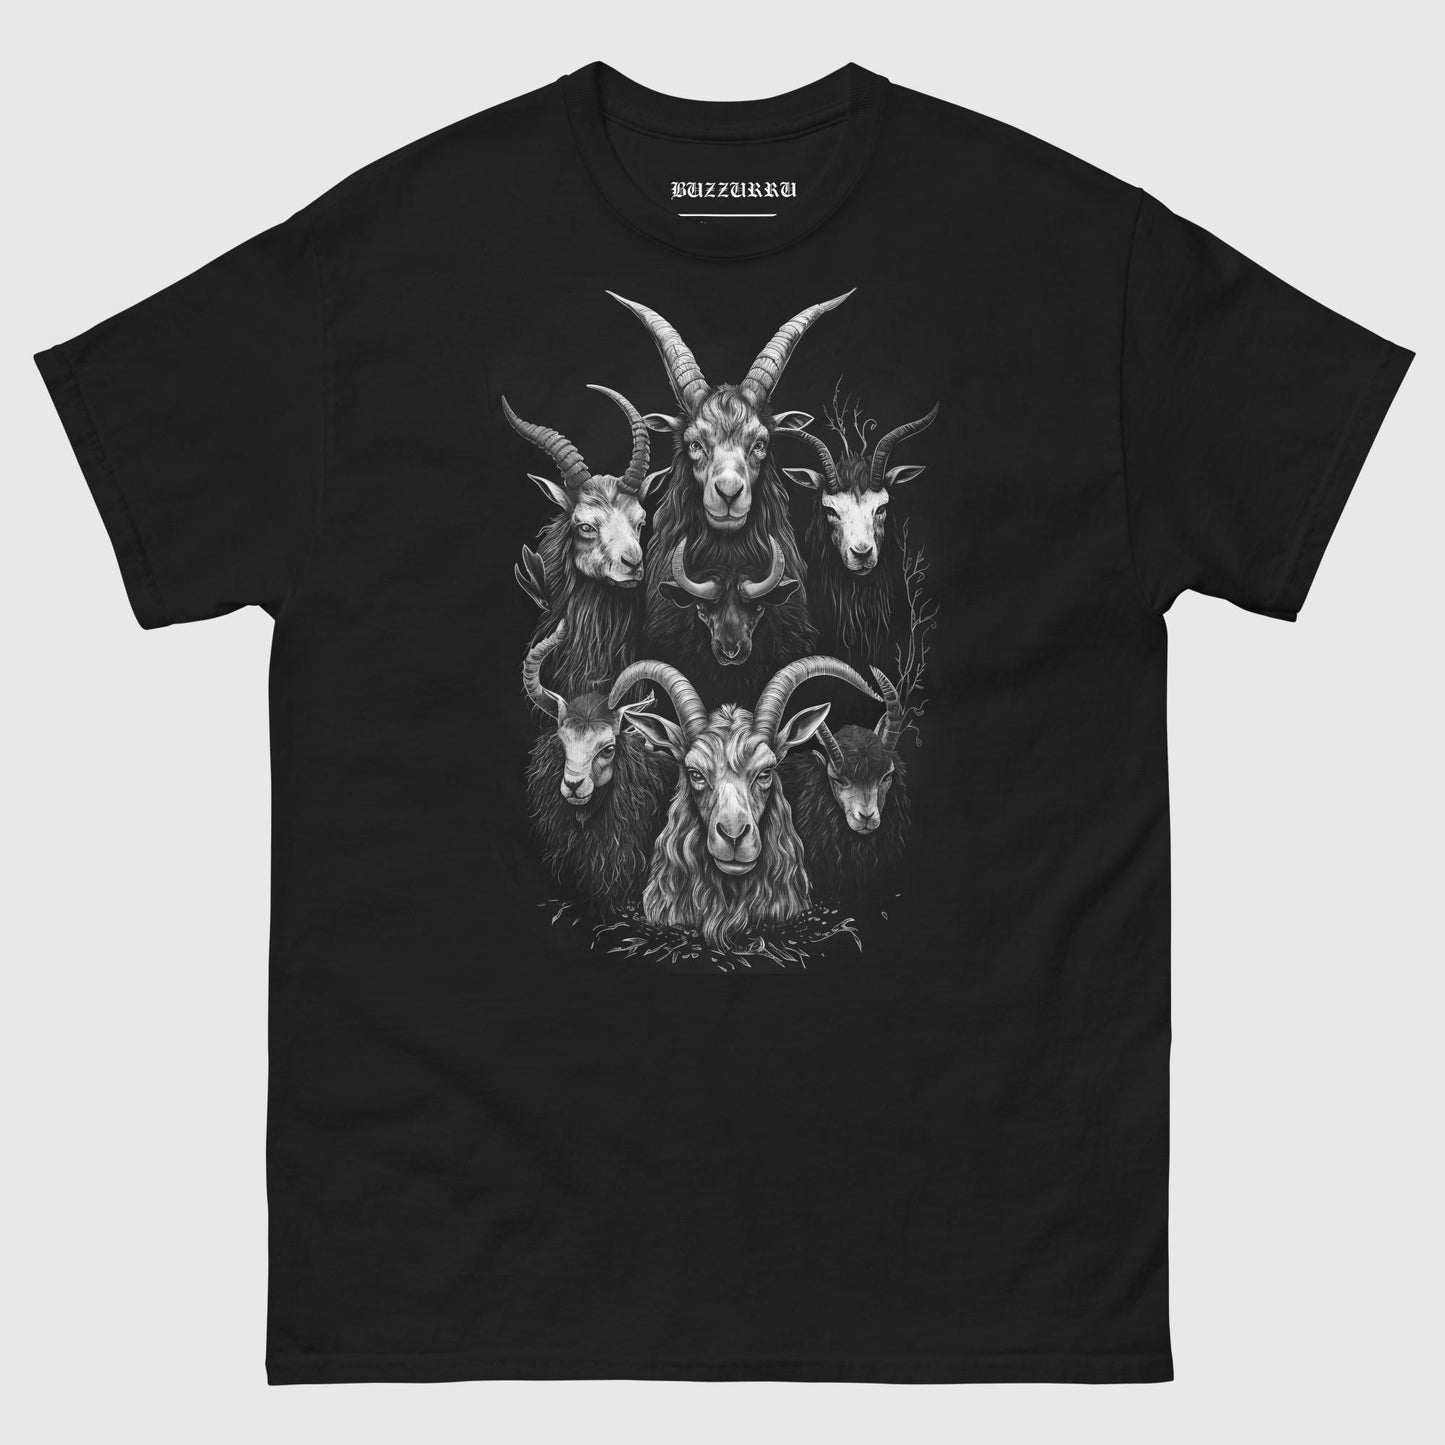 Black Metal - Goats are Sexy